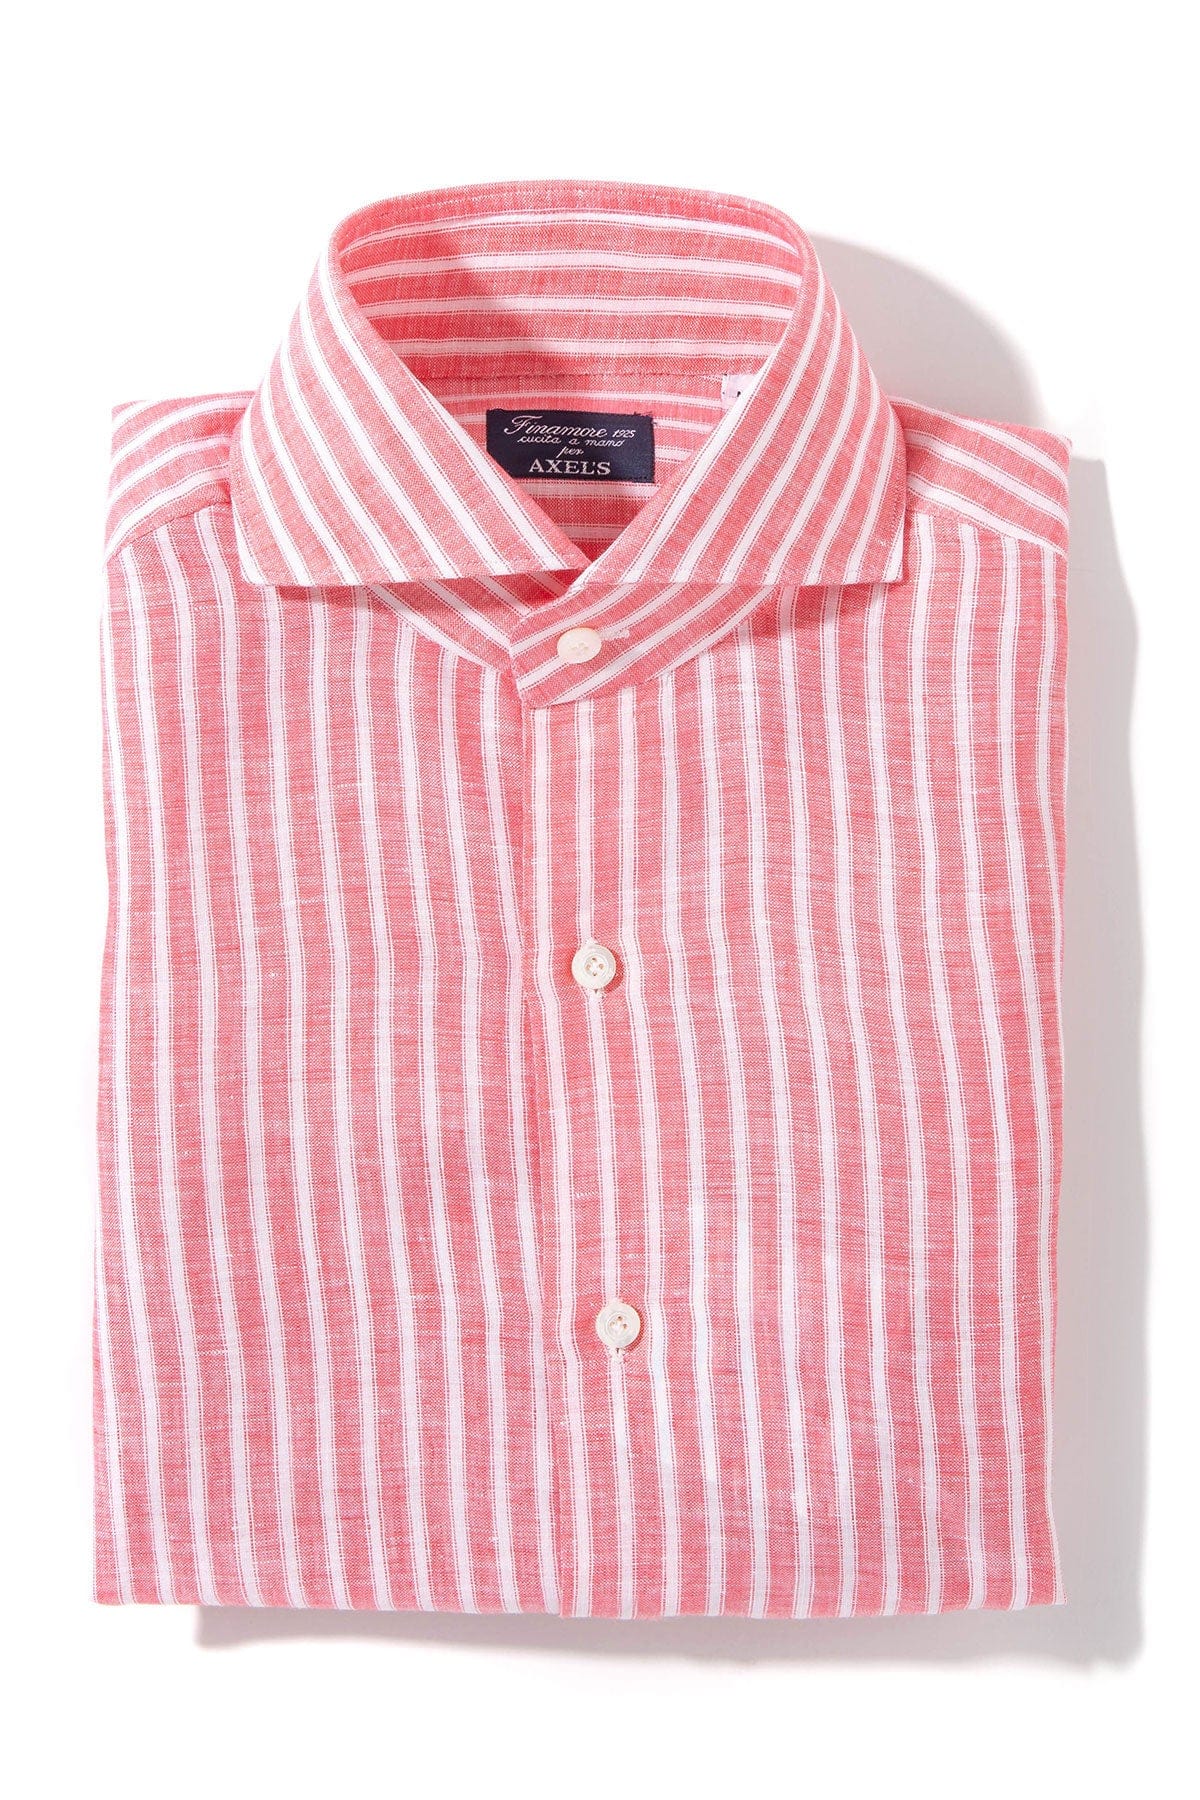 Bonobo Linen Washed Bengal Stripe In Red - AXEL'S